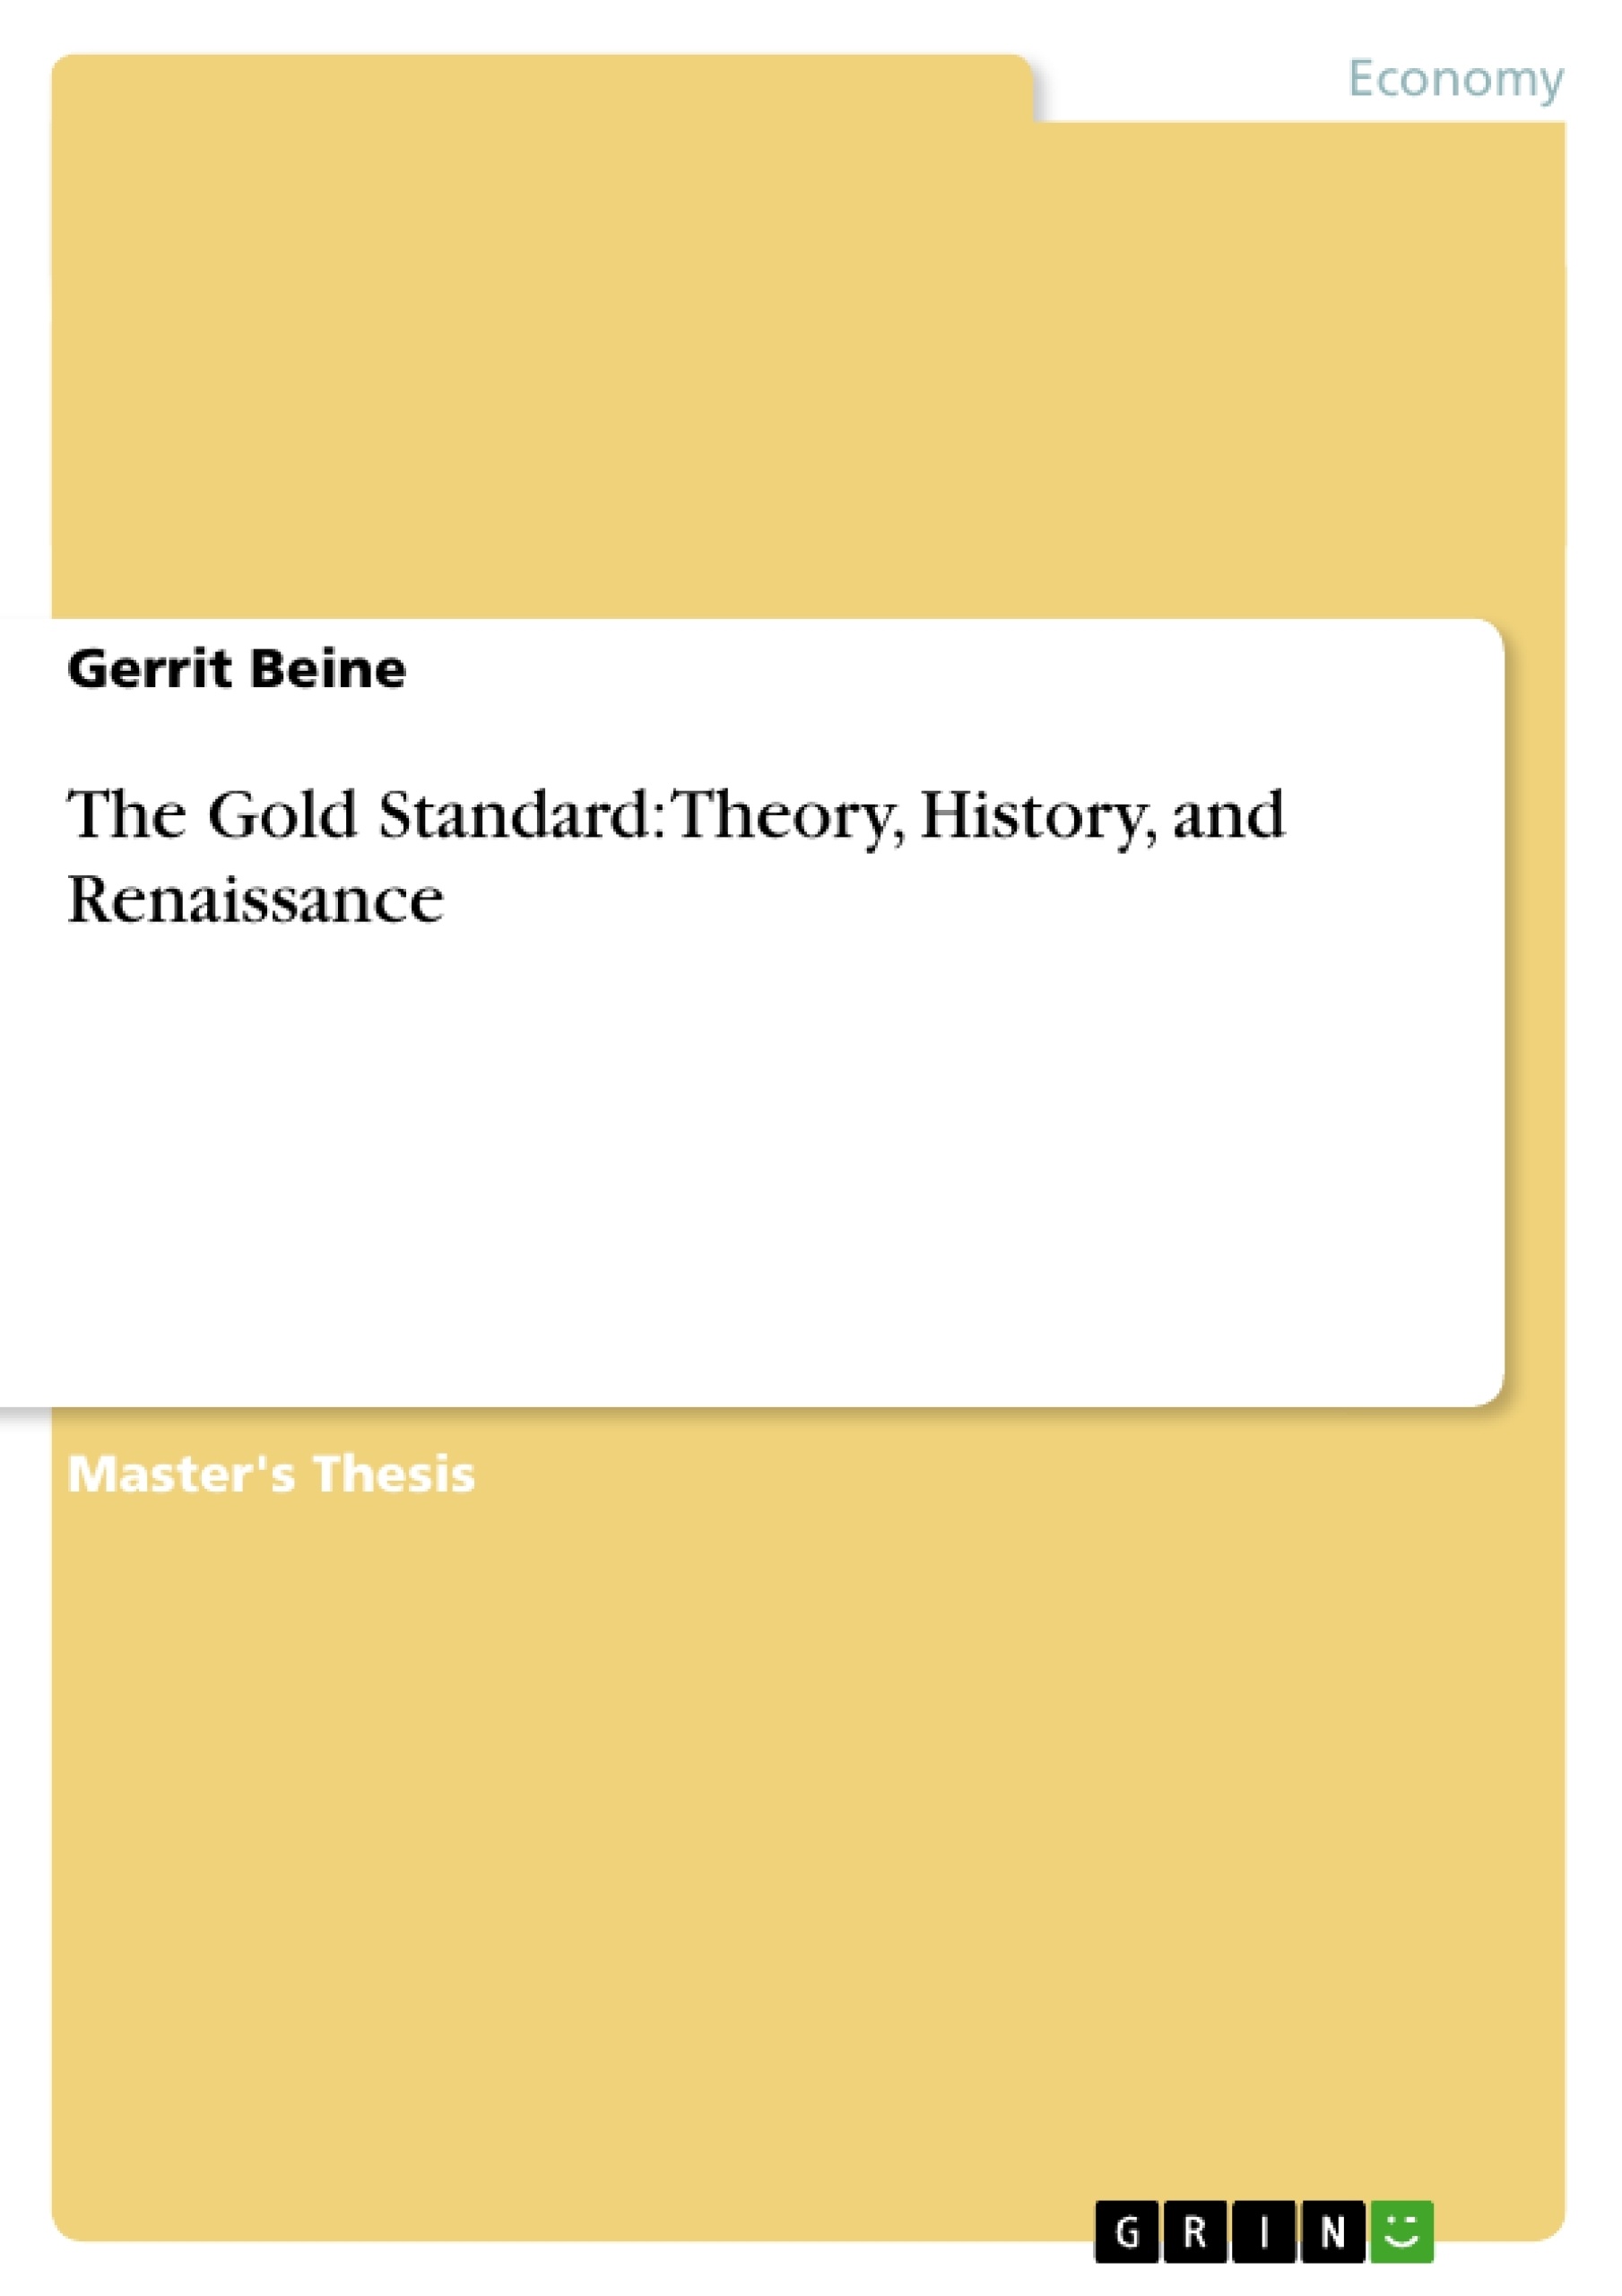 Titel: The Gold Standard: Theory, History, and Renaissance